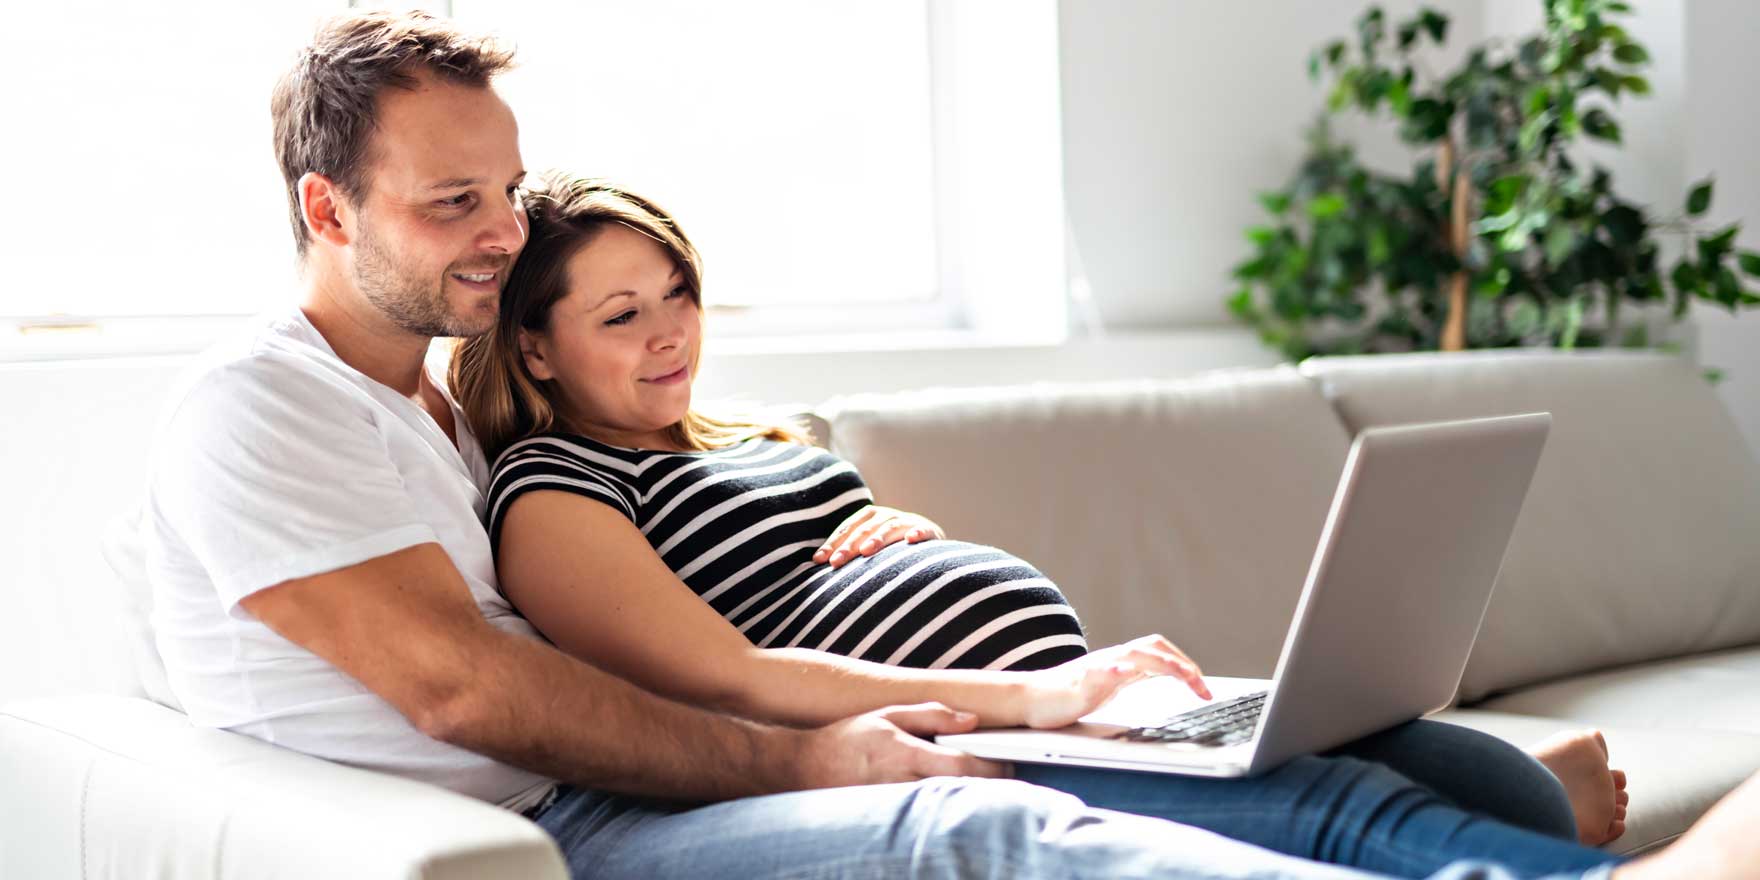 Pregnant mom and dad sitting on a sofa while looking at a laptop screen together